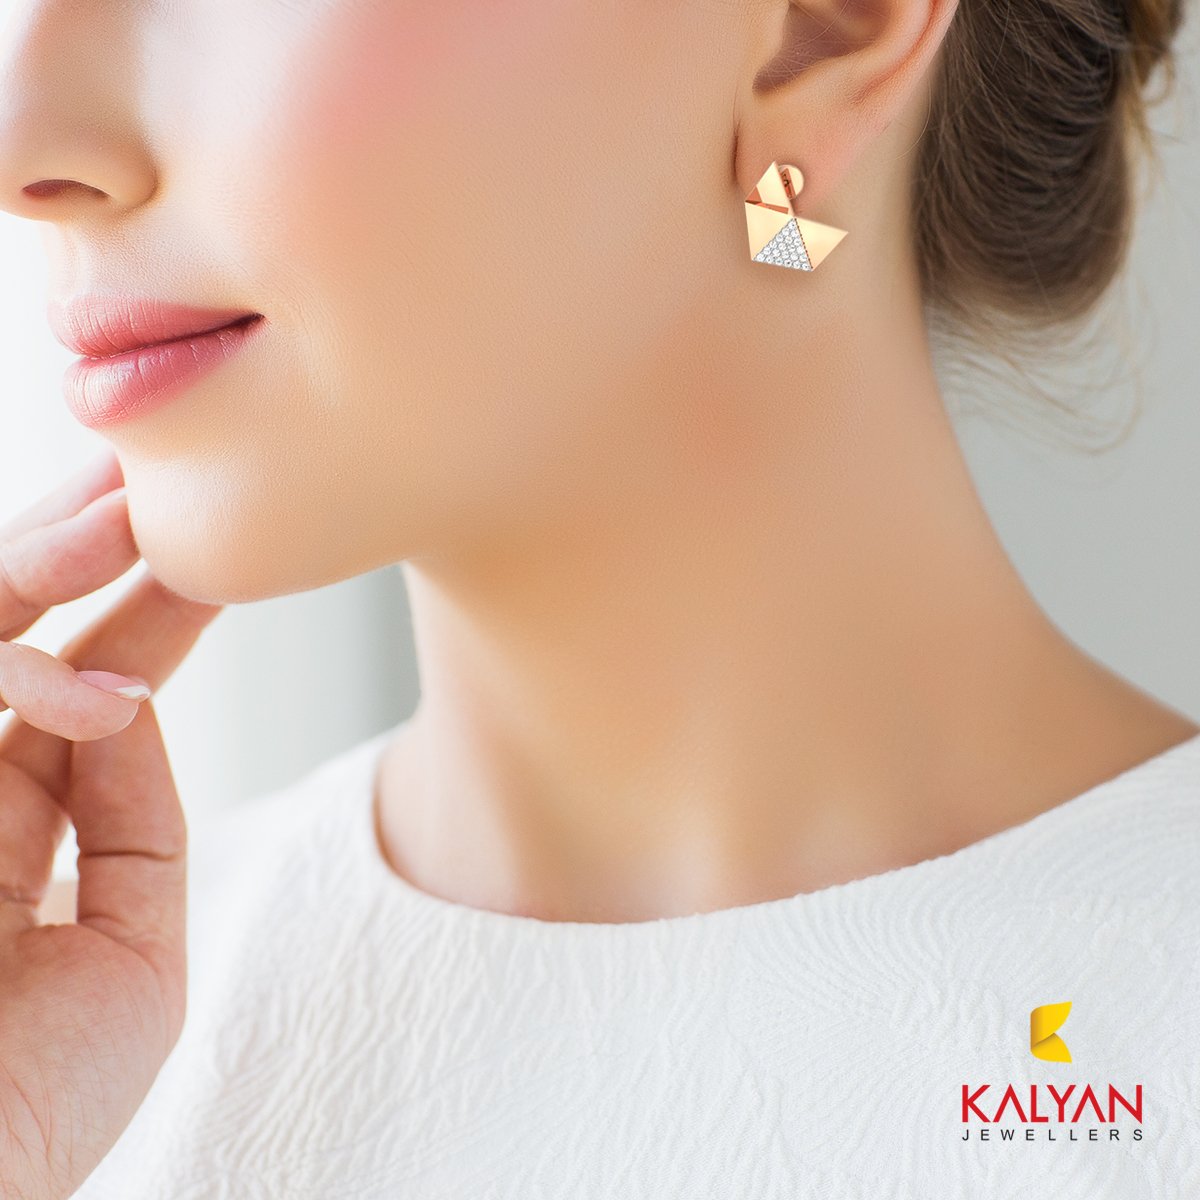 Candere by Kalyan Jewellers Yellow Gold 18kt Dangle Earring Price in India  - Buy Candere by Kalyan Jewellers Yellow Gold 18kt Dangle Earring online at  Flipkart.com